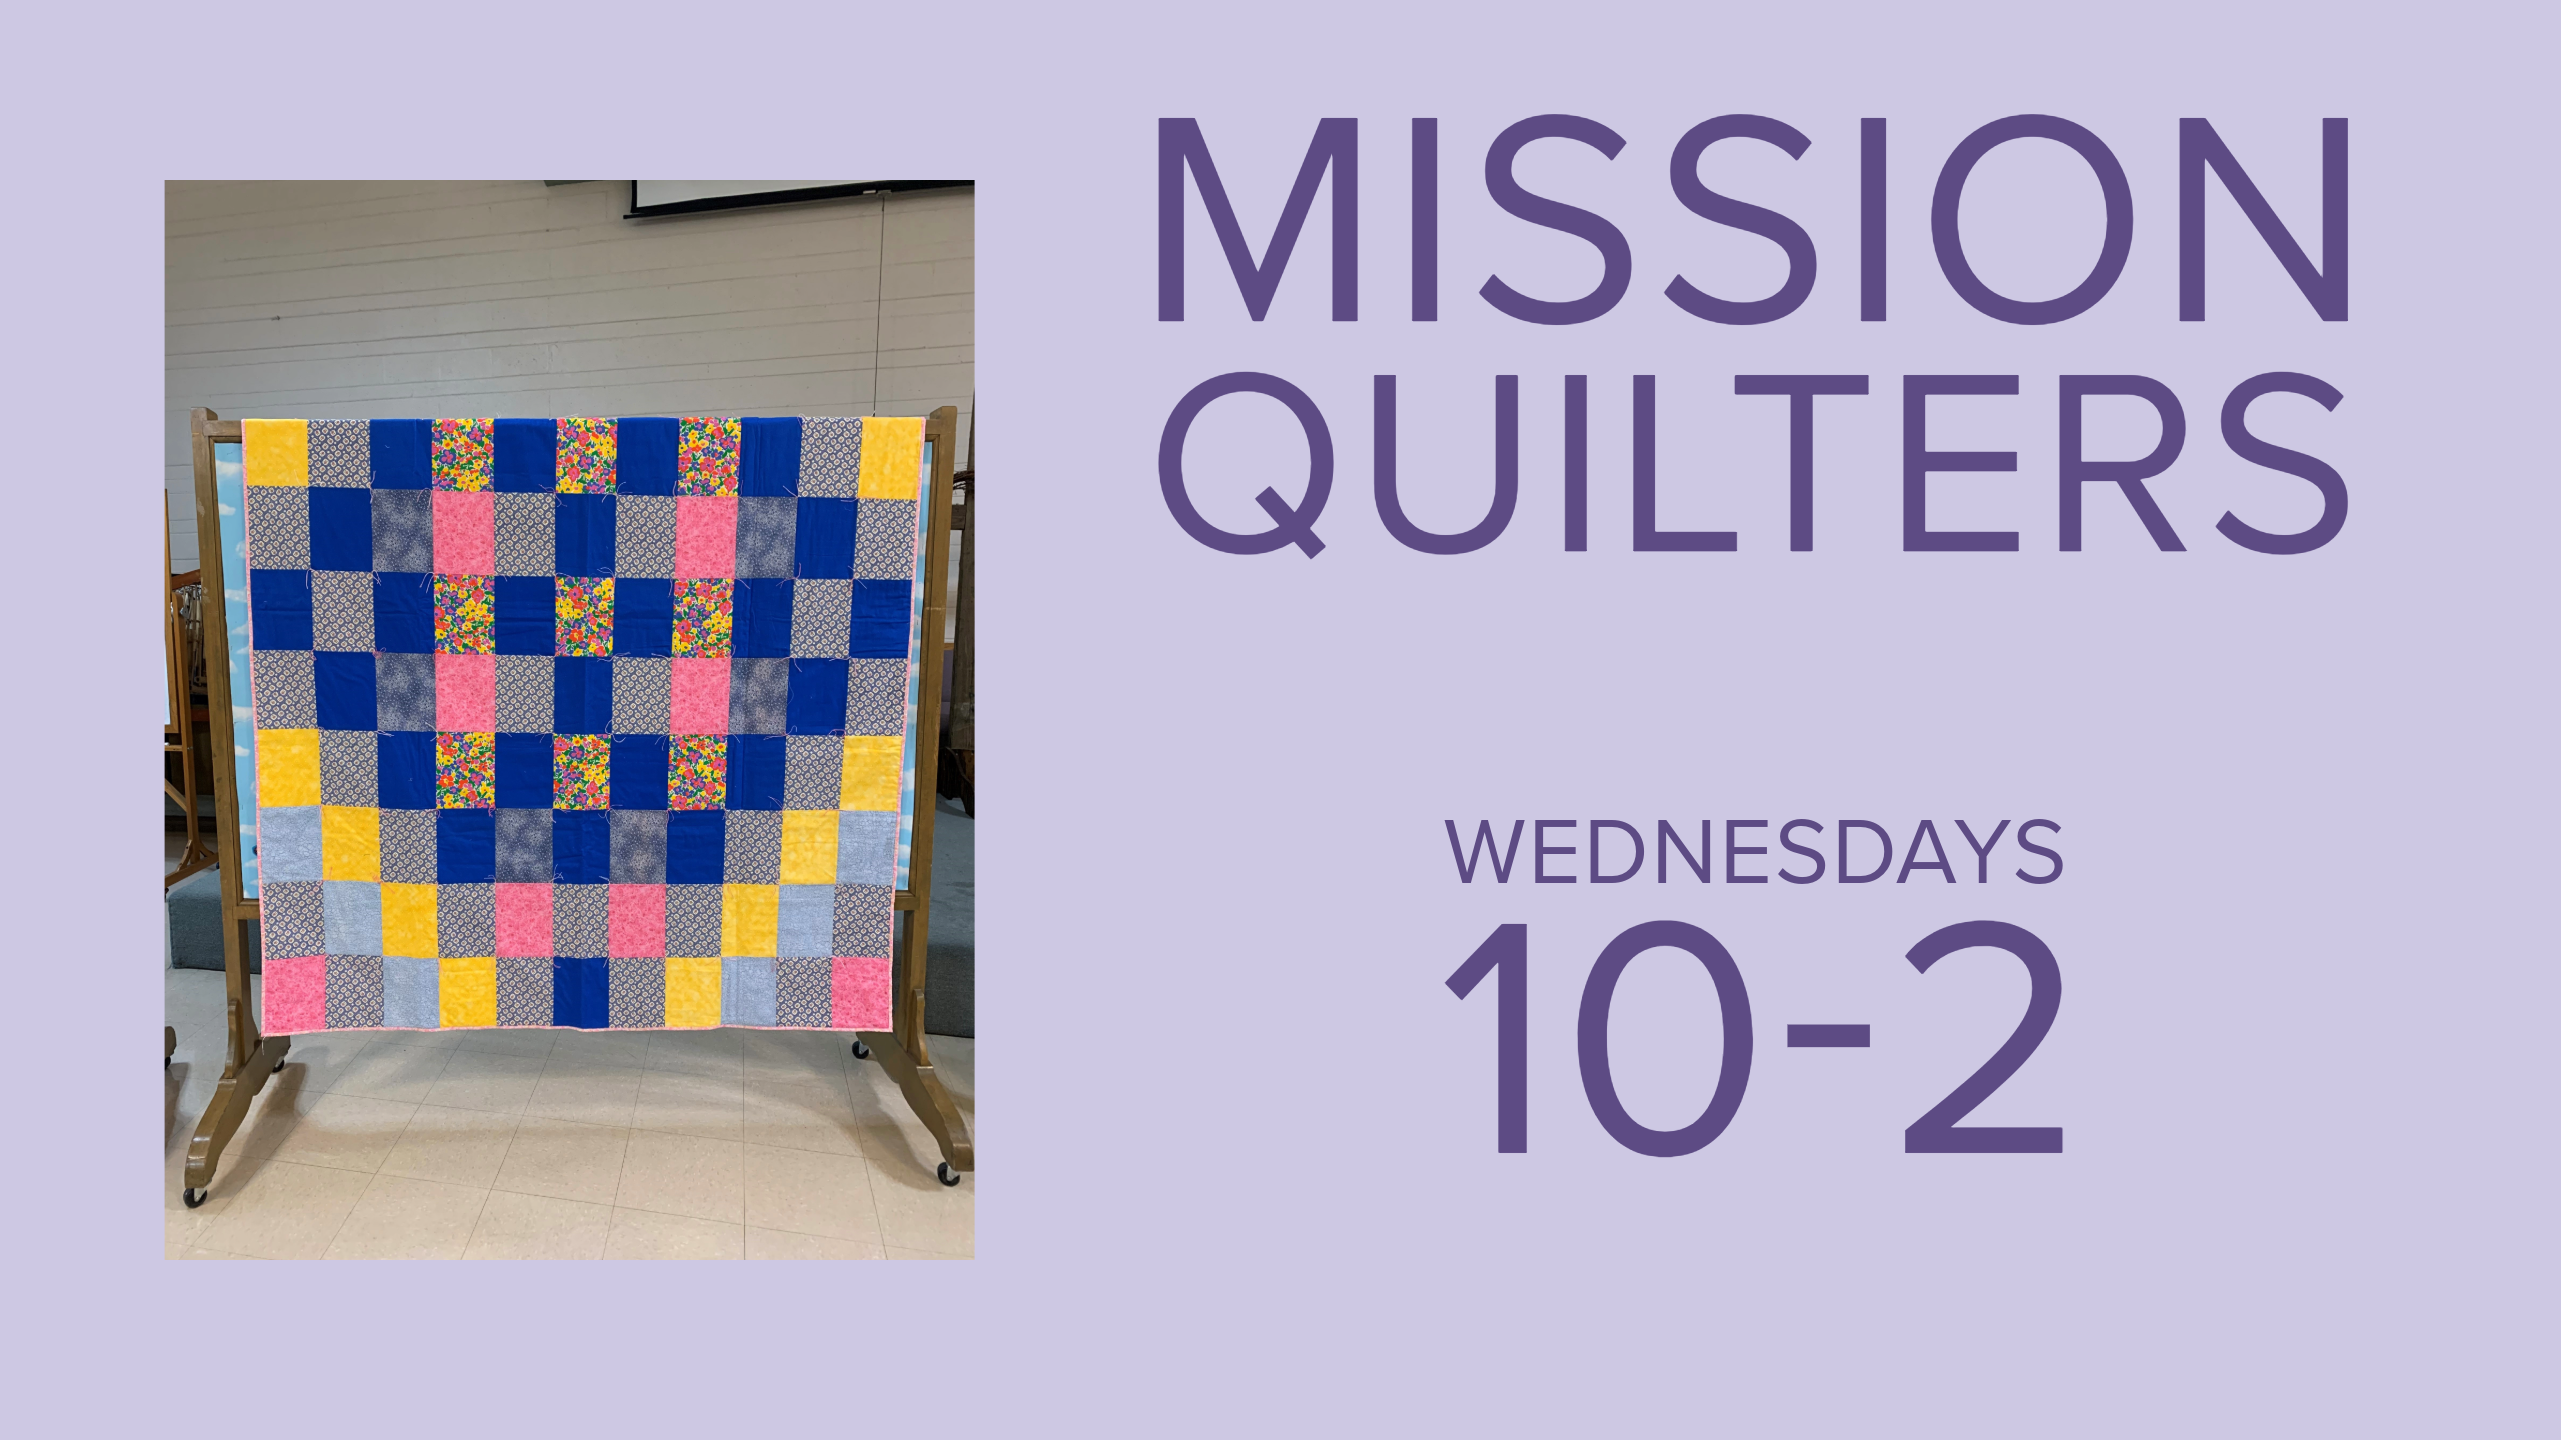 photo of a quilt on a purple background with dark purple letters that spell out "Mission Quilters Wednesdays 10-2"